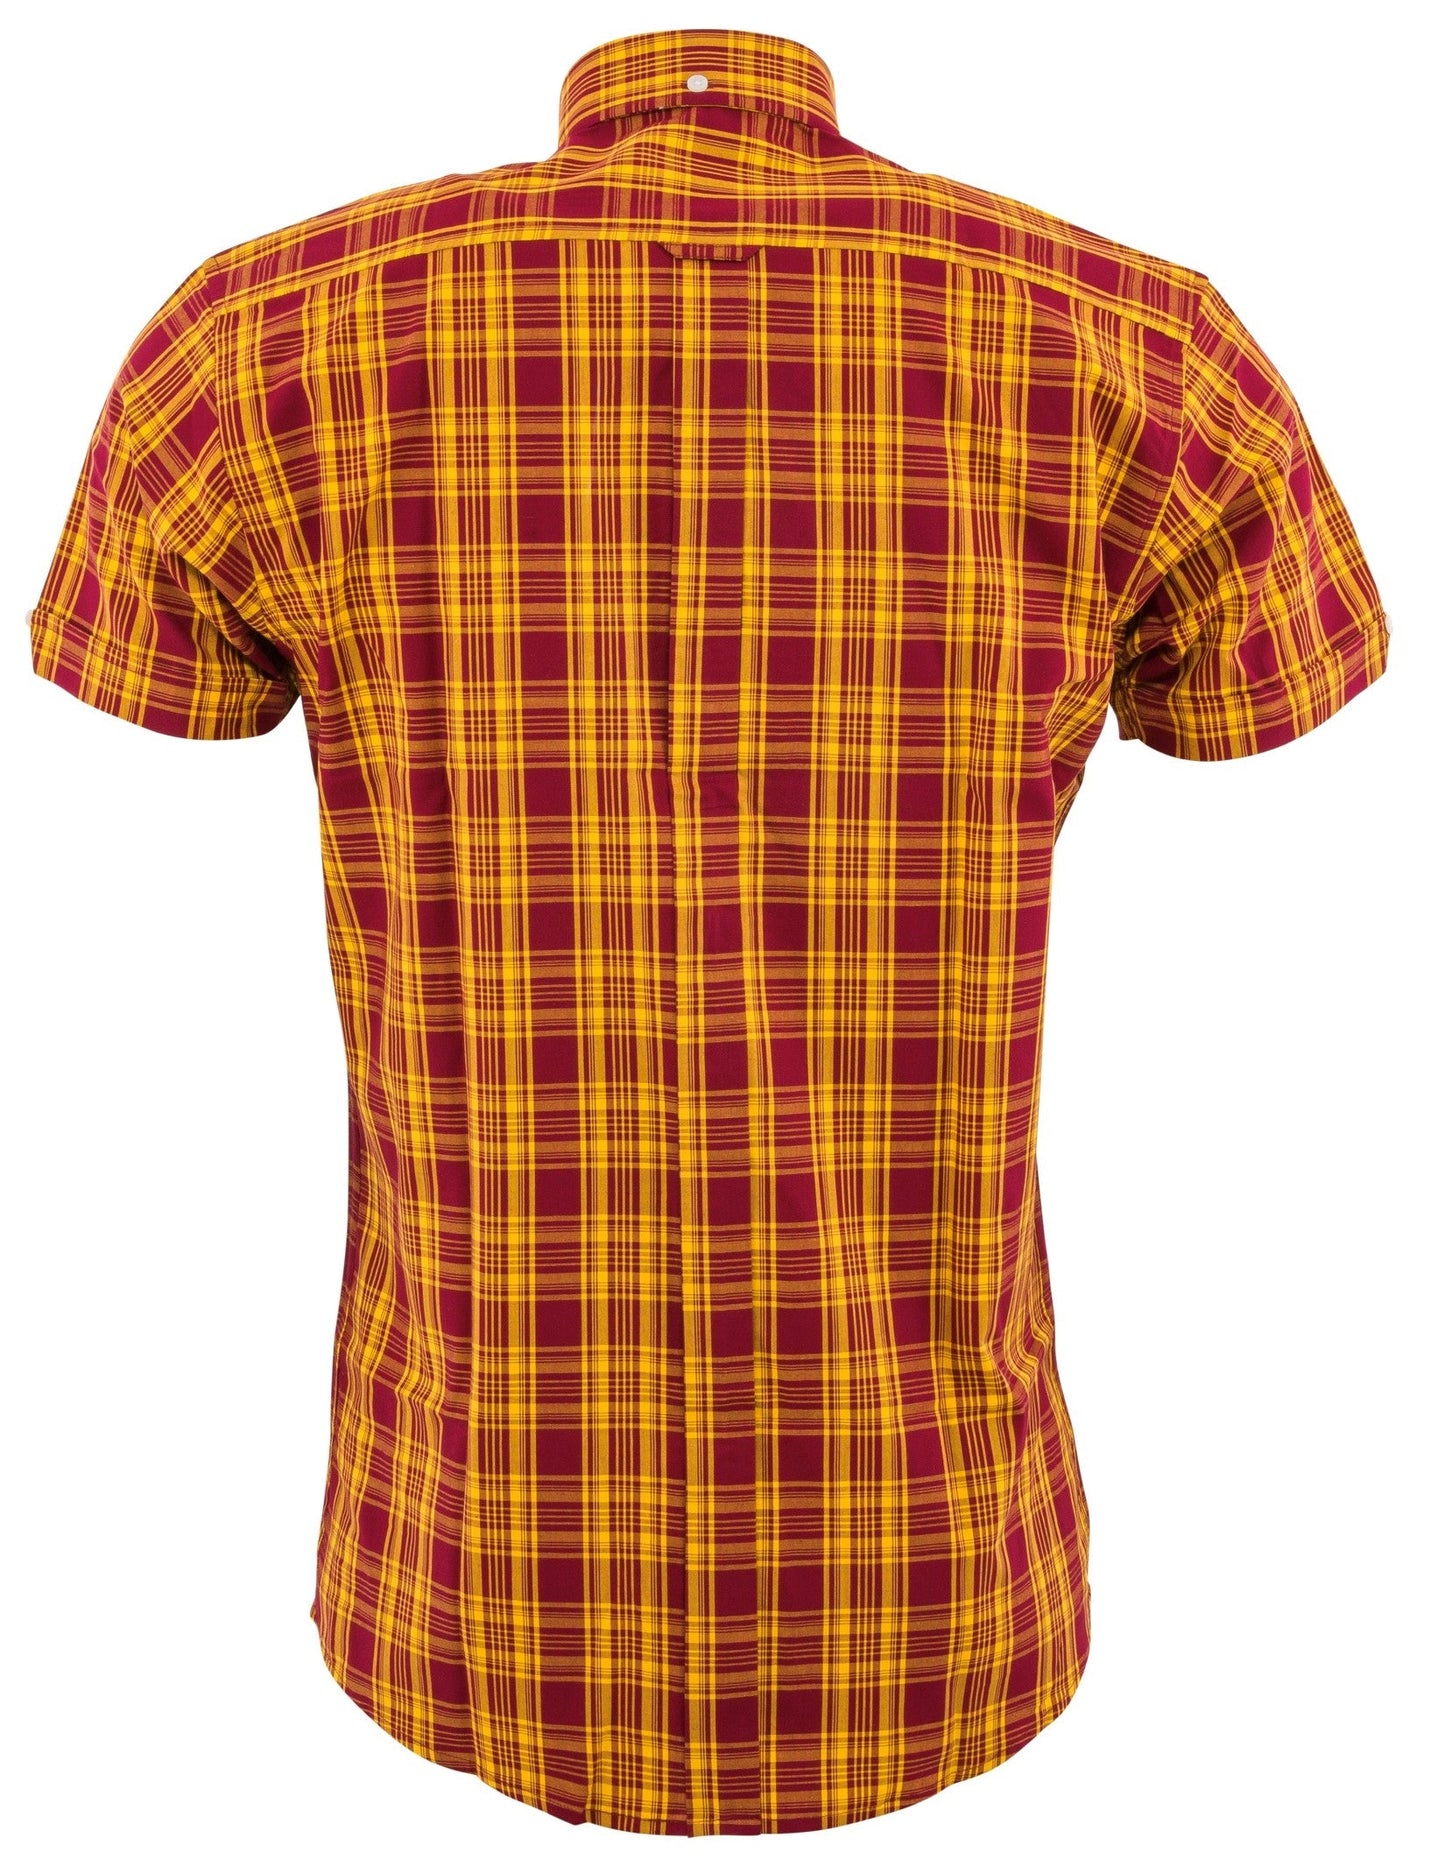 Relco Mens Burgundy & Mustard Checked Short Sleeved Button Down Shirts